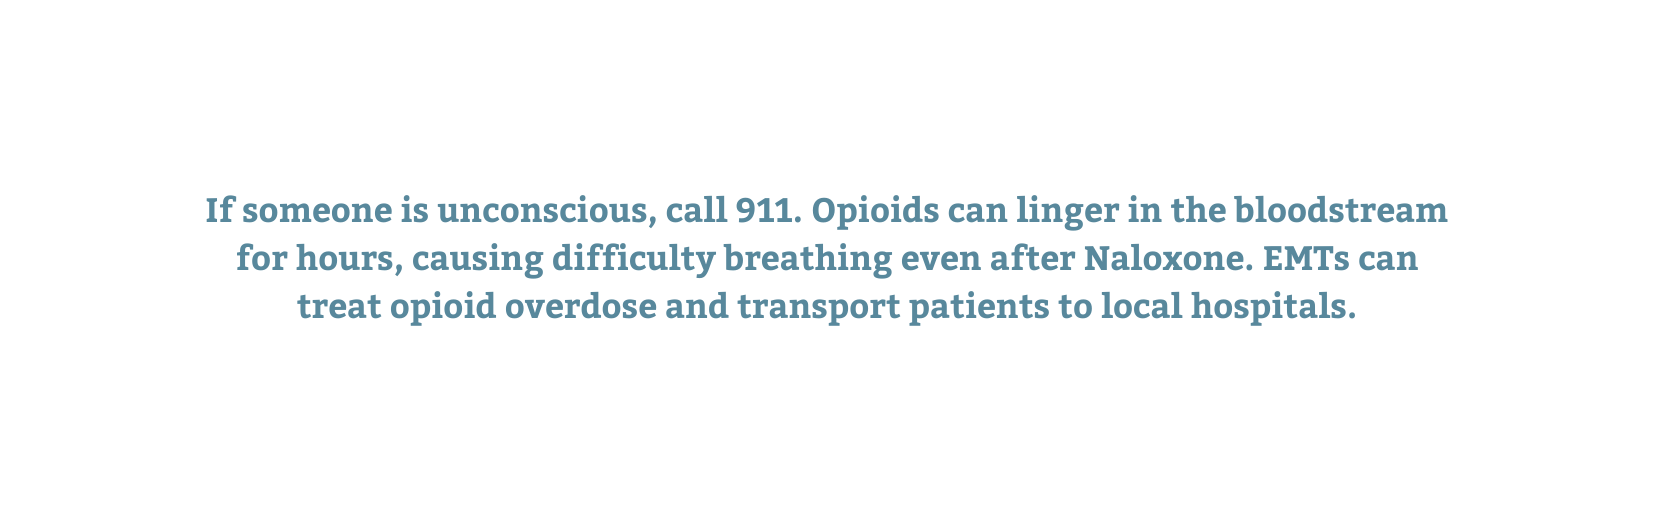 If someone is unconscious call 911 Opioids can linger in the bloodstream for hours causing difficulty breathing even after Naloxone EMTs can treat opioid overdose and transport patients to local hospitals